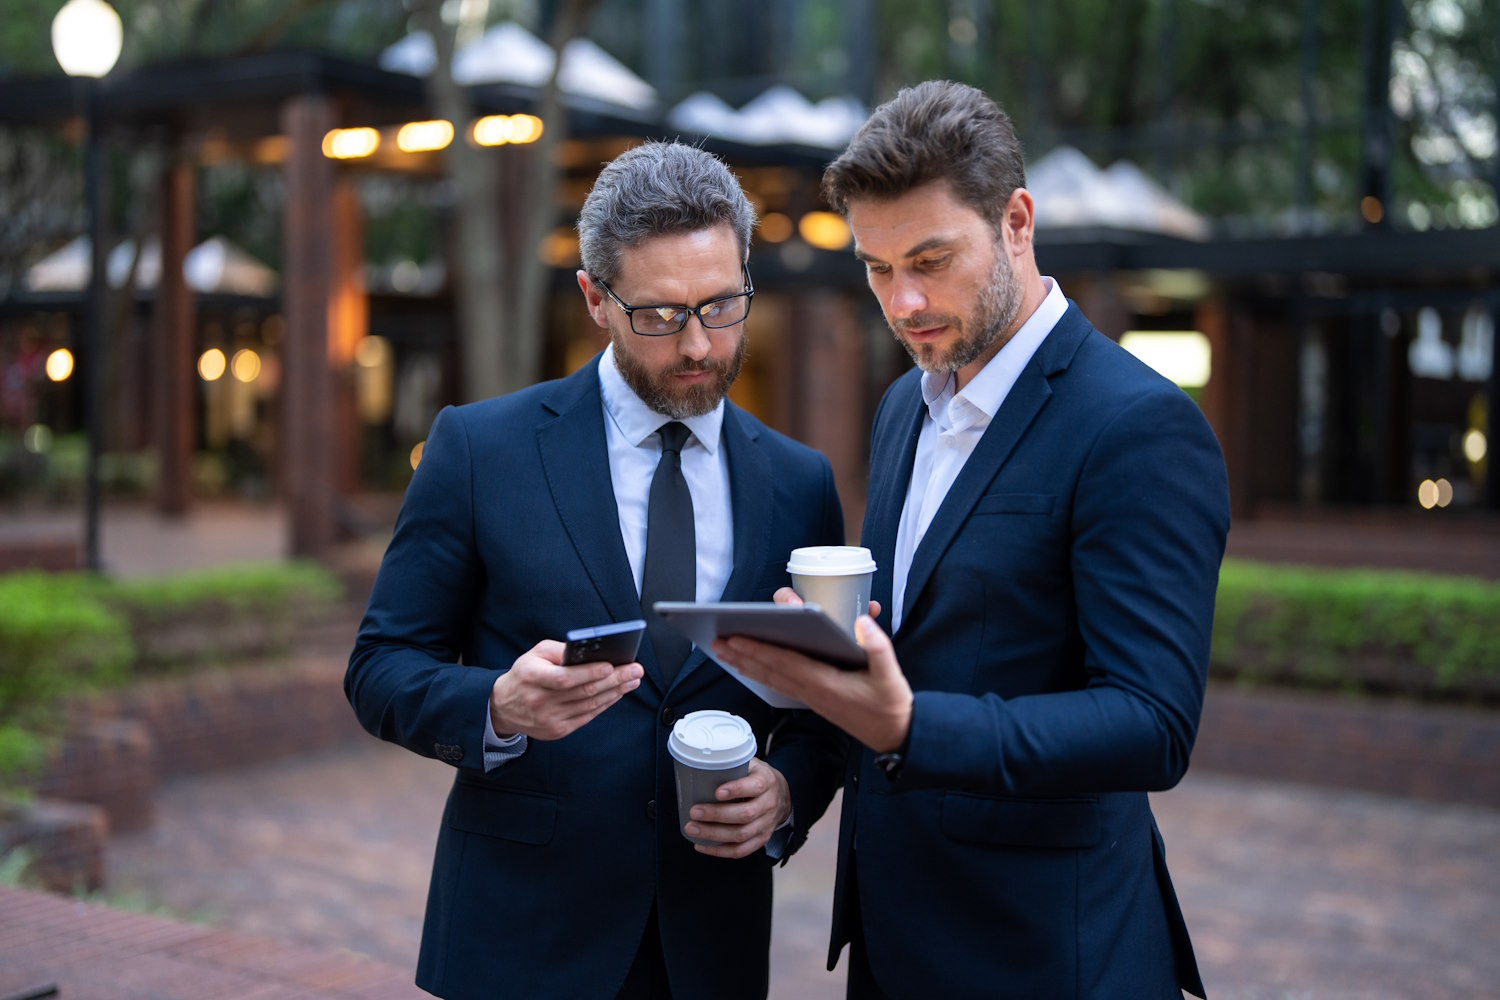 Two business men reading a tablet outdoors.